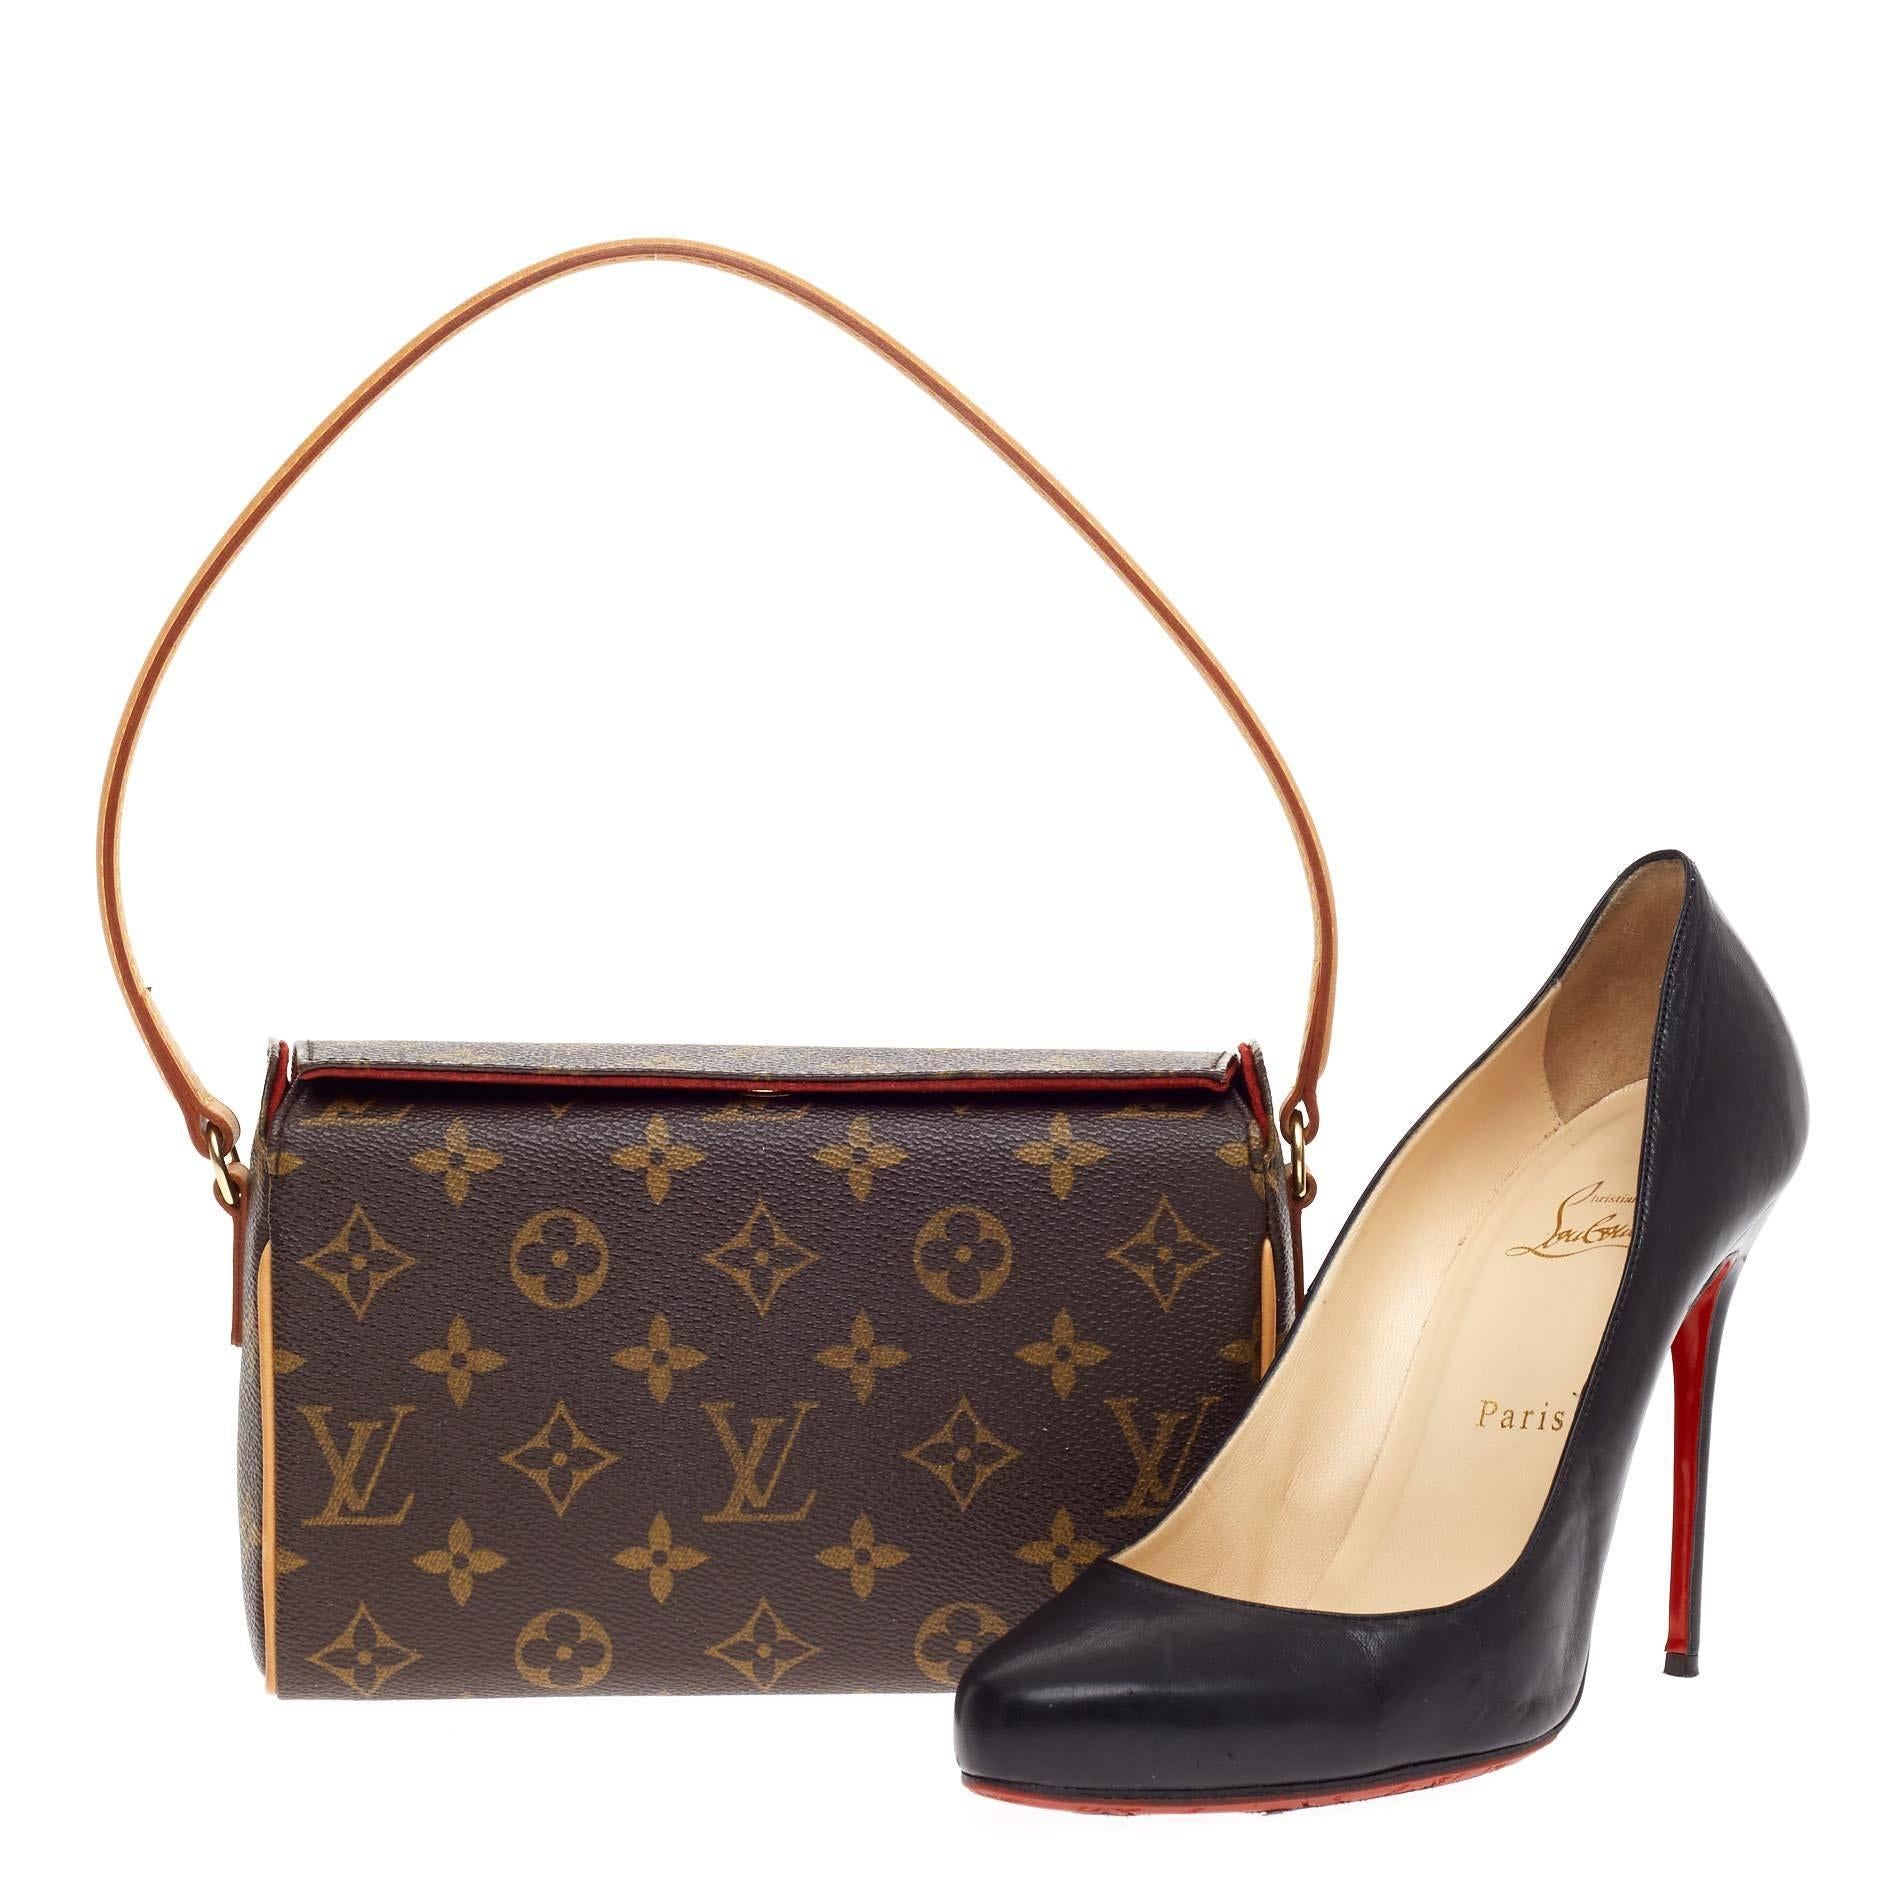 This authentic Louis Vuitton Recital Monogram Canvas is a versatile day-to-evening bag. Crafted from the brand's iconic brown monogram printed canvas, this petite shoulder bag features a single looped vachetta leather handle and trims, and gold-tone